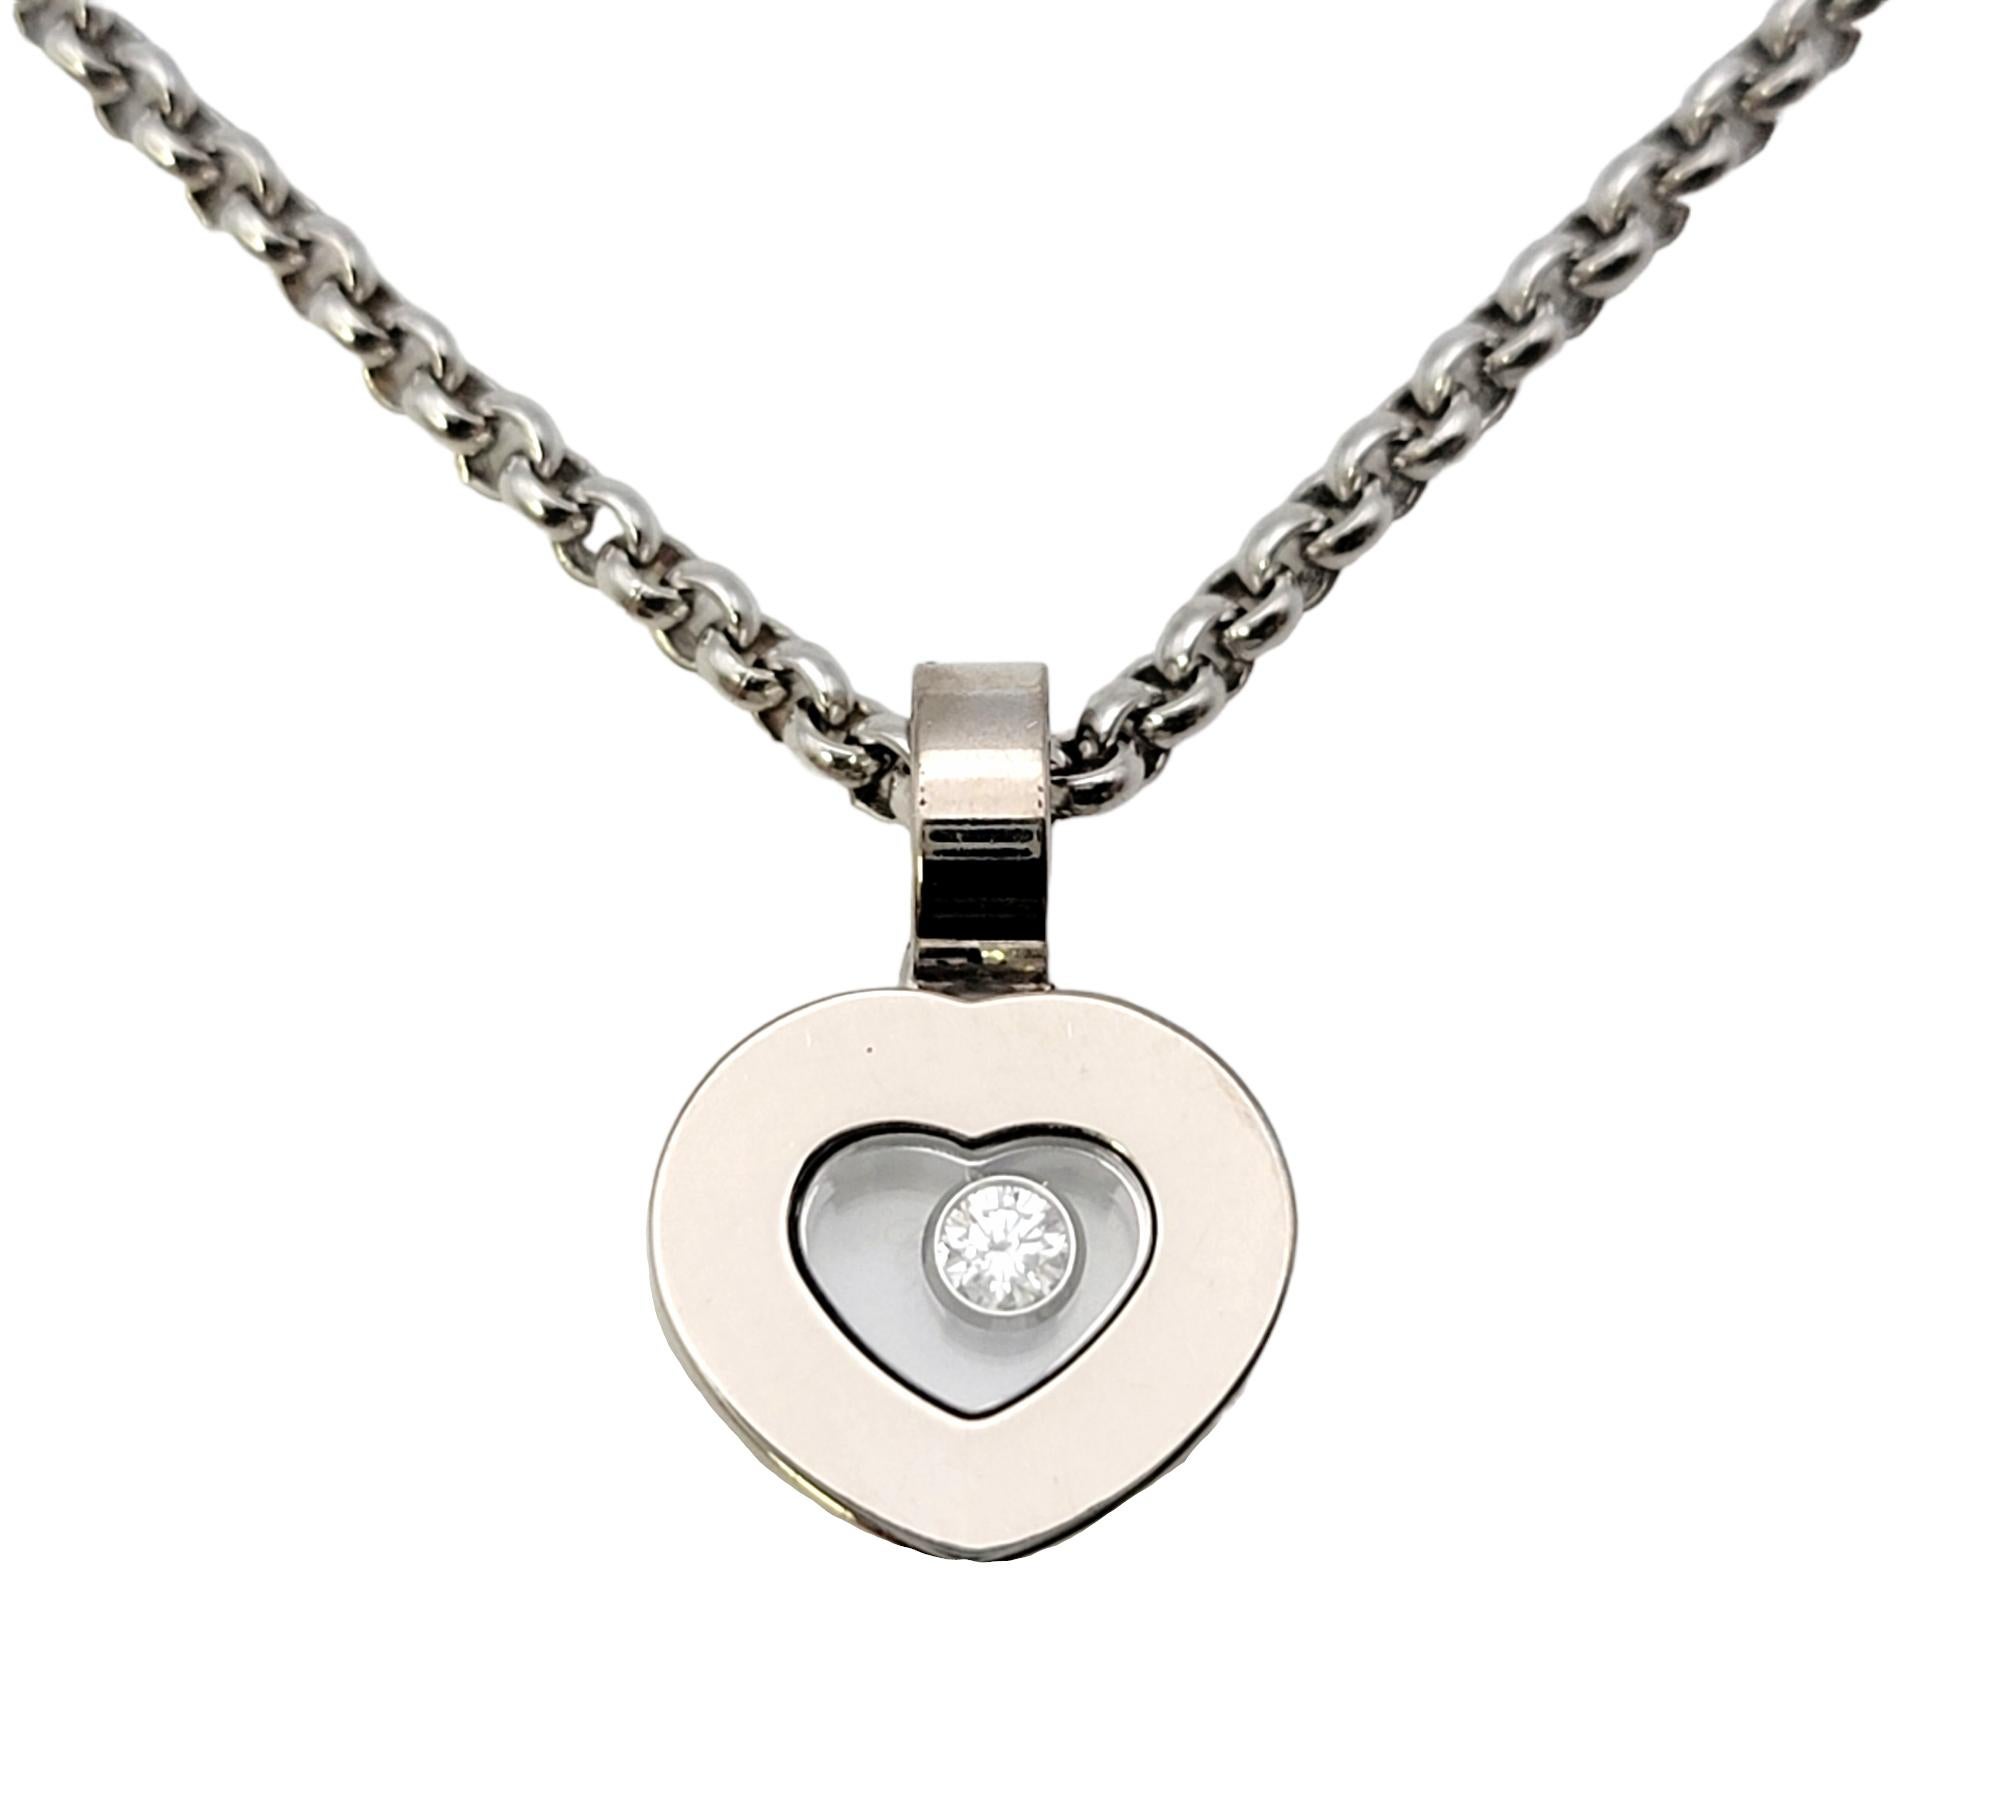 Simple yet elegant heart pendant with a playful floating diamond detail by French designer, Chopard. Part of the 'Happy Diamonds Icons' collection, this unique necklace offers understated sparkle and shine with a chic twist. You will love this